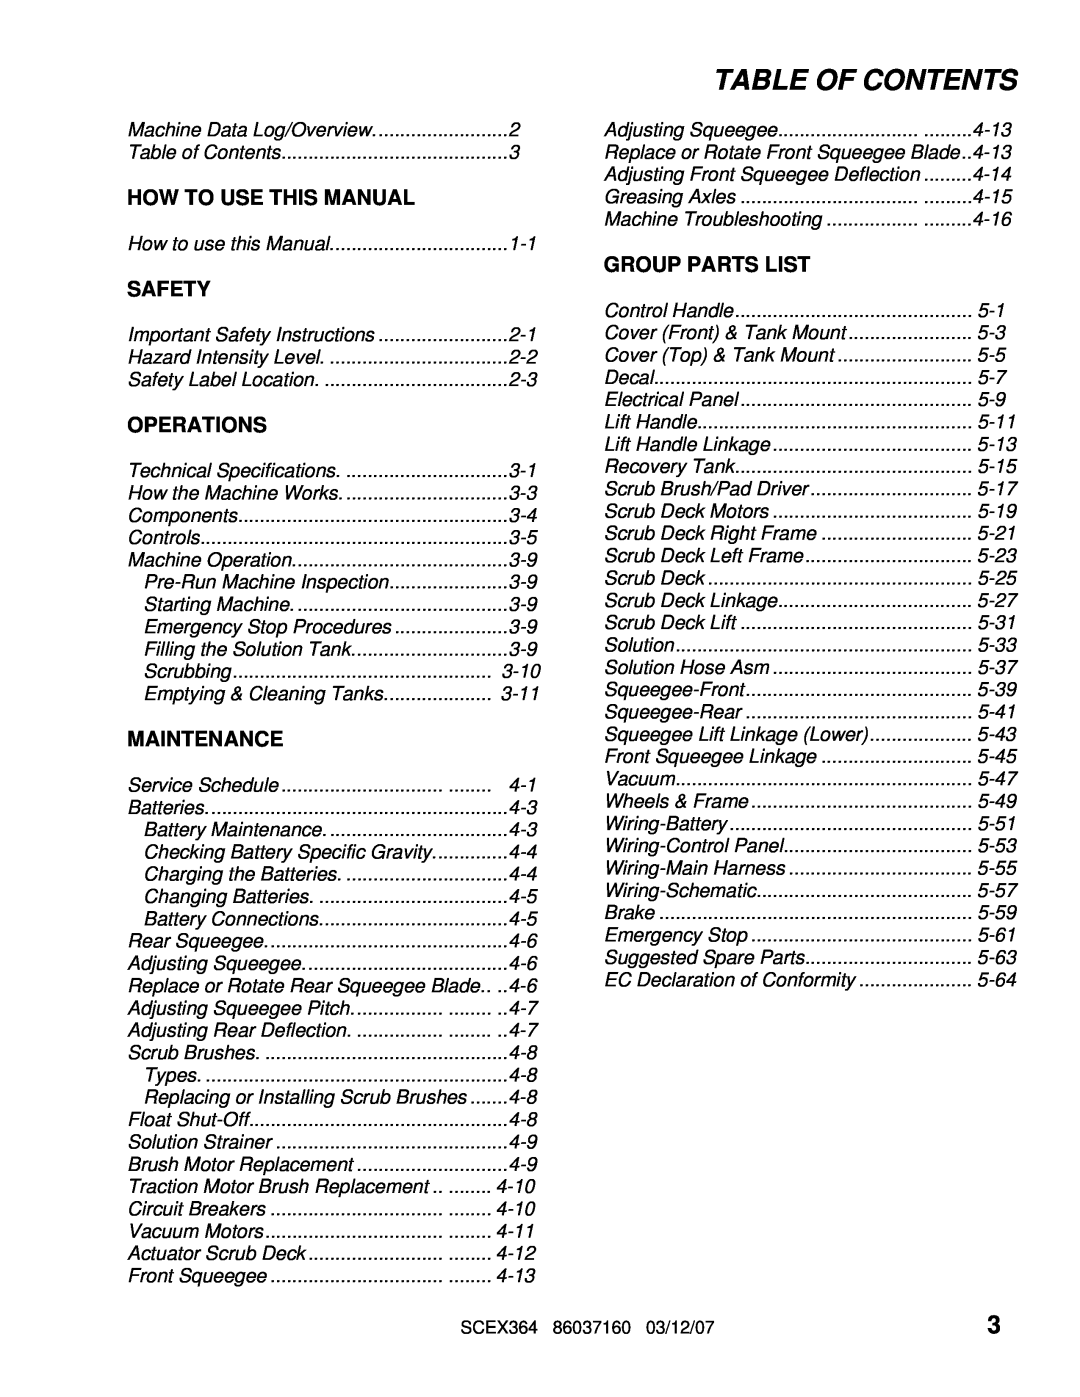 Windsor 10052350, SCEX364 Table Of Contents, How To Use This Manual, Safety, Operations, Maintenance, Group Parts List 